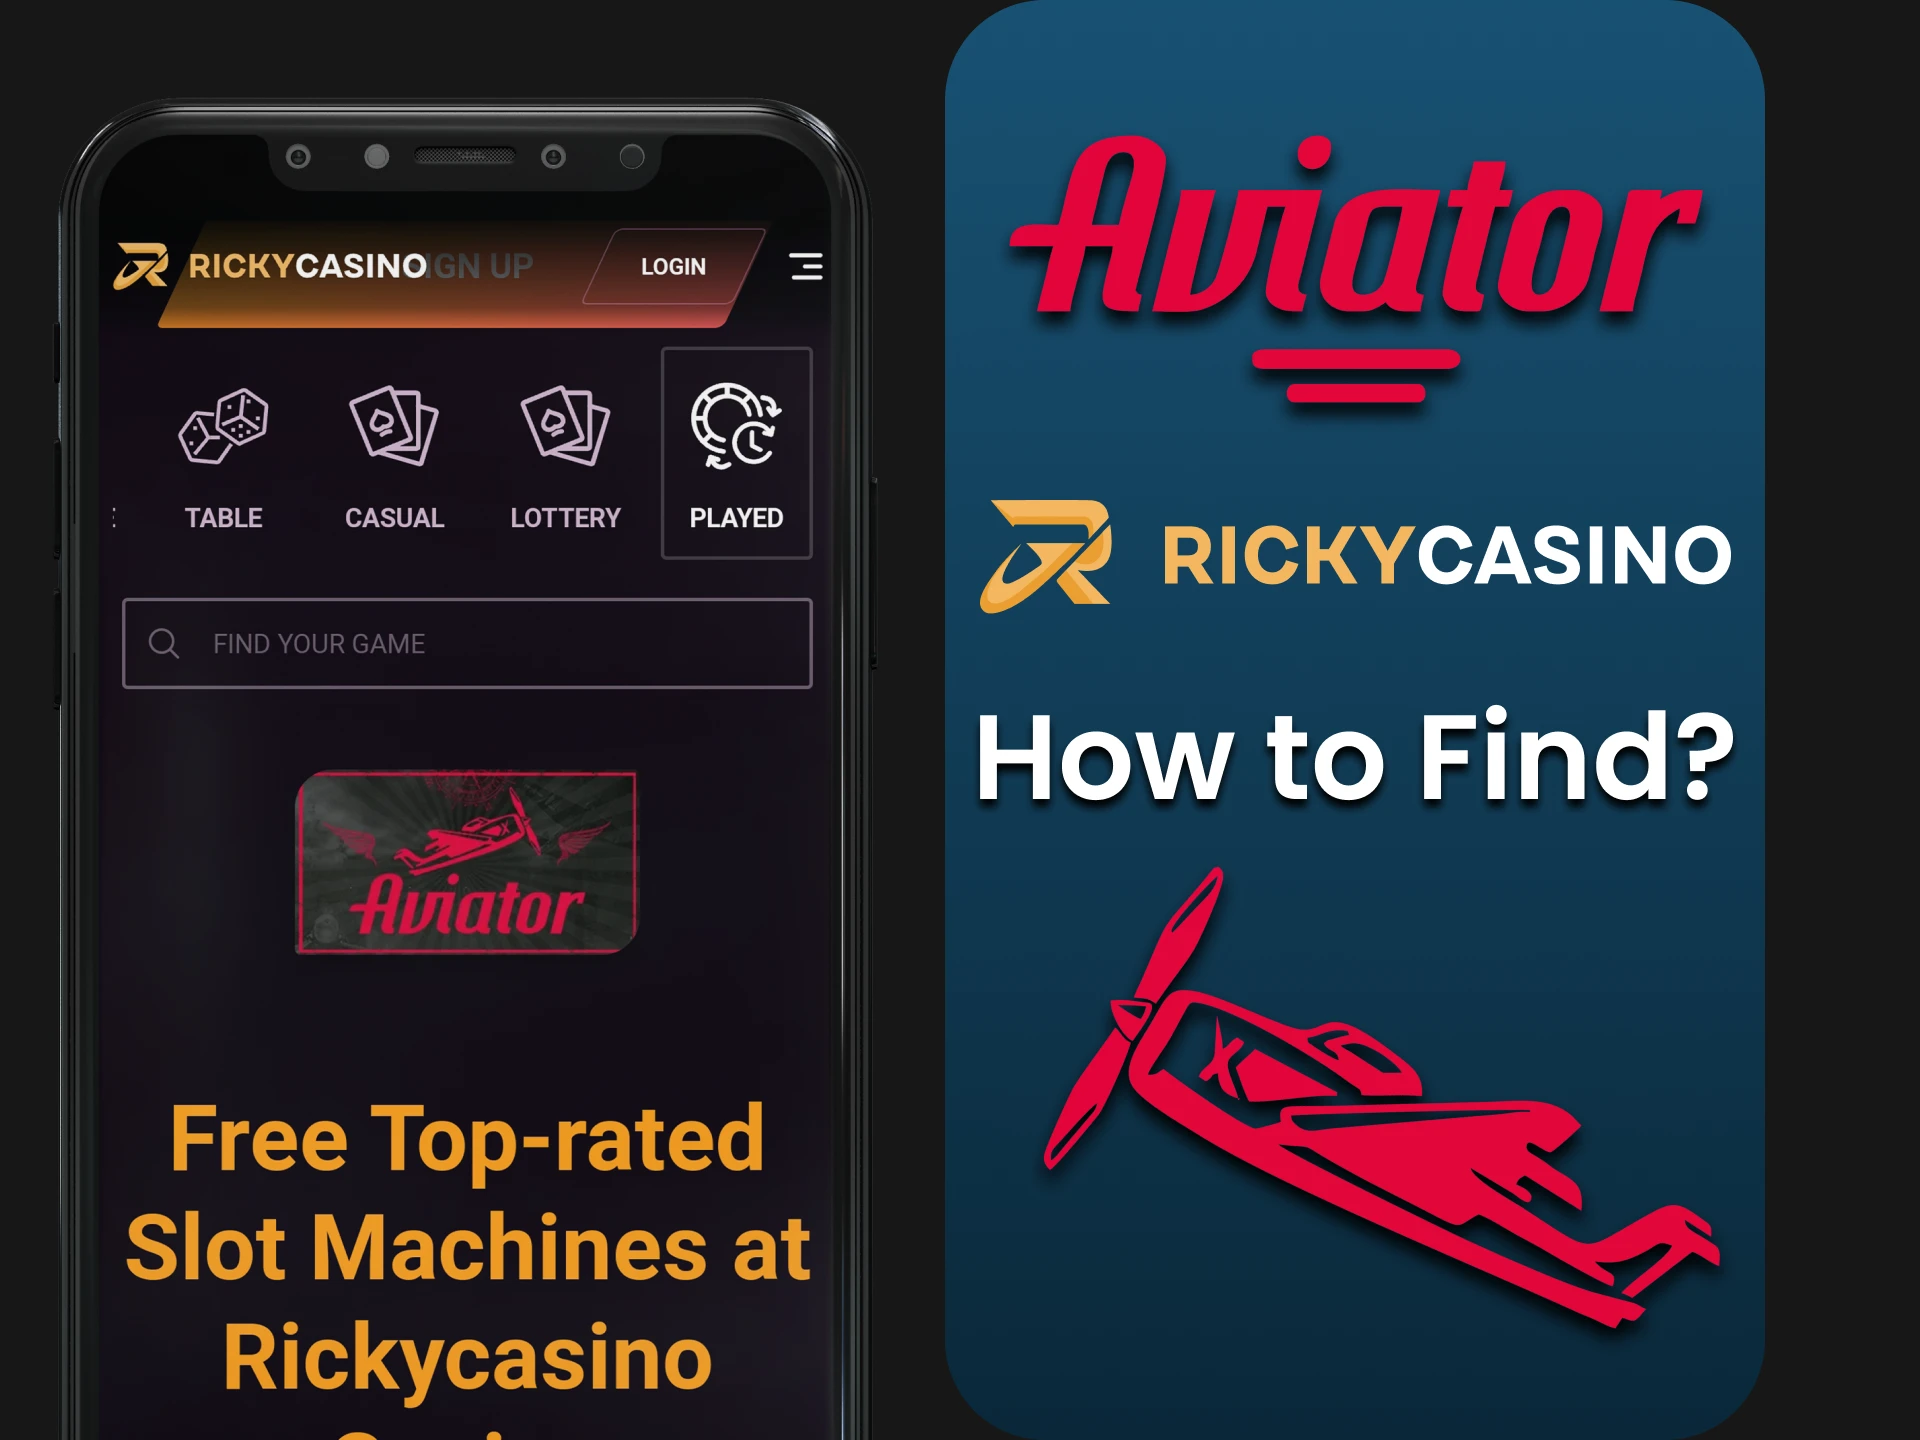 In the game sections of the Ricky Casino application you will find Aviator.